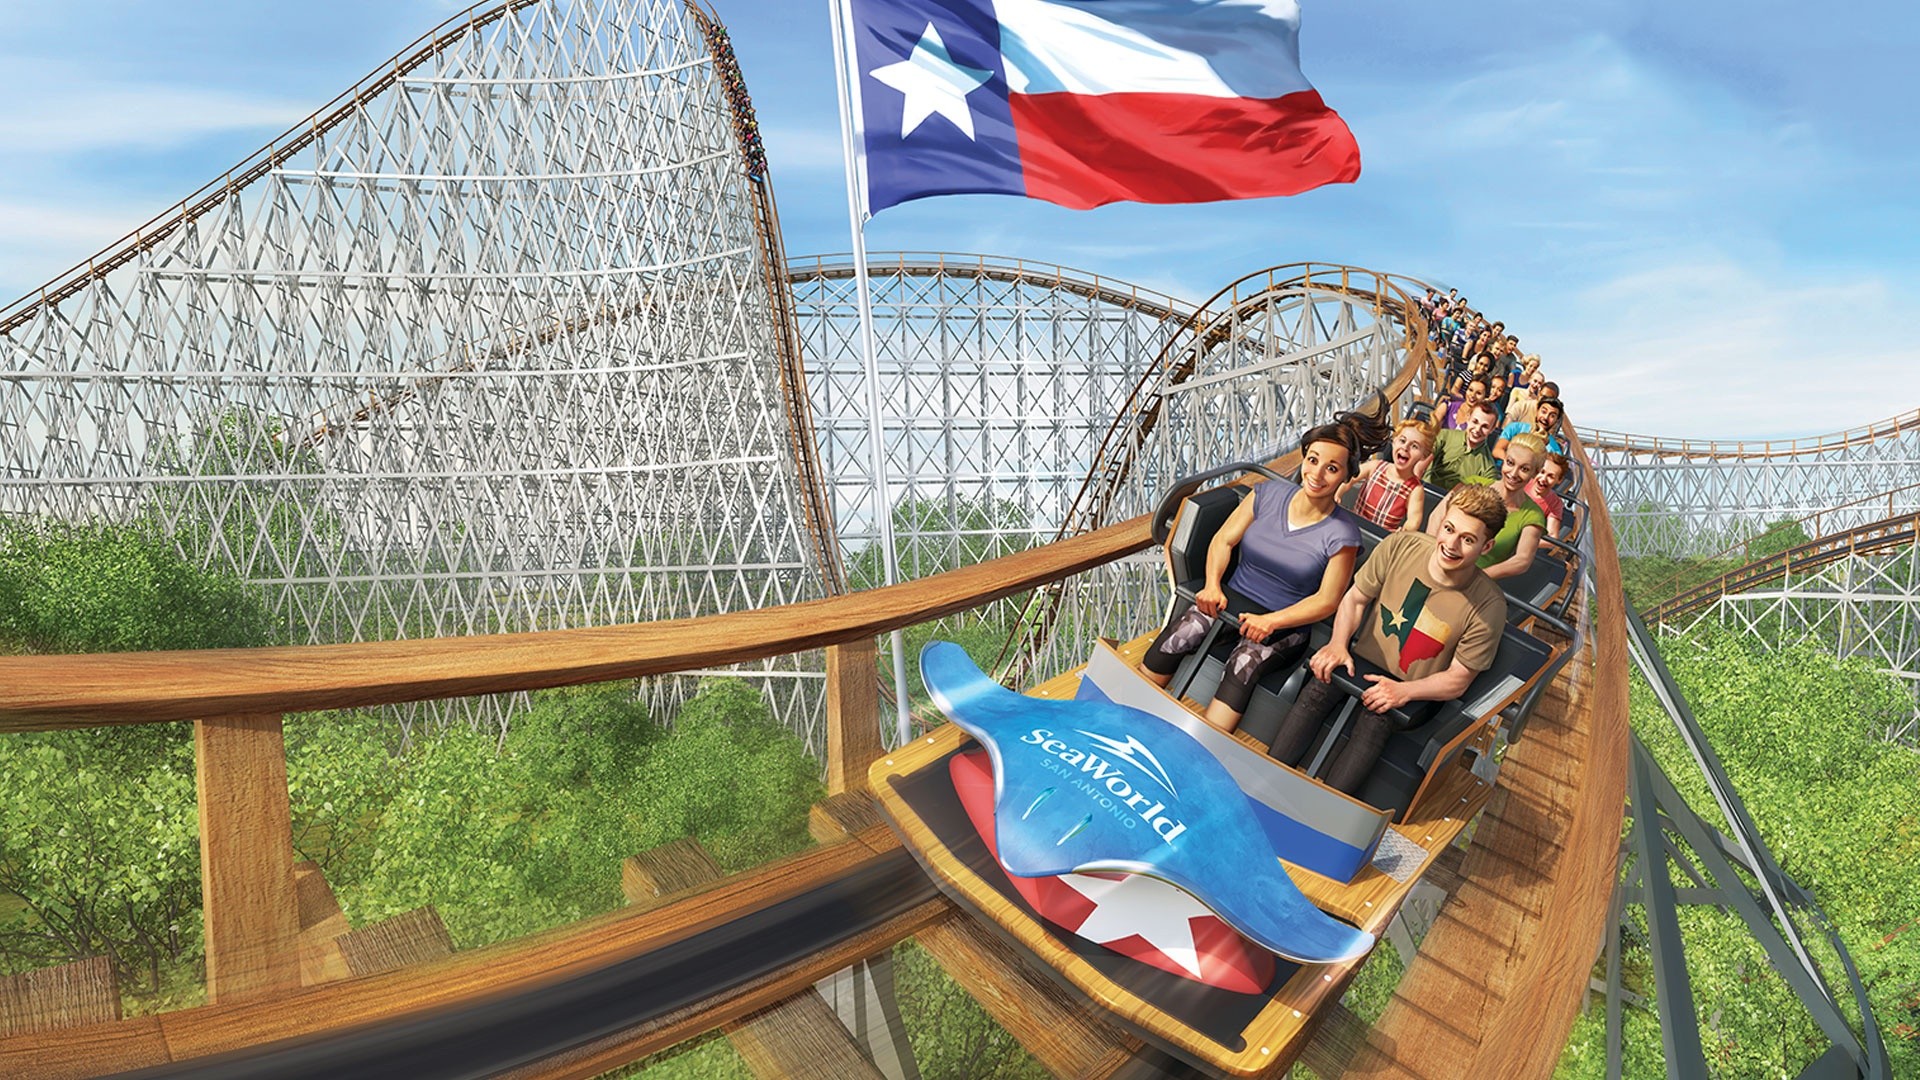 Seaworld San Antonio Debuts Massive Wooden Roller Coaster And First Of Its Kind Water Slide